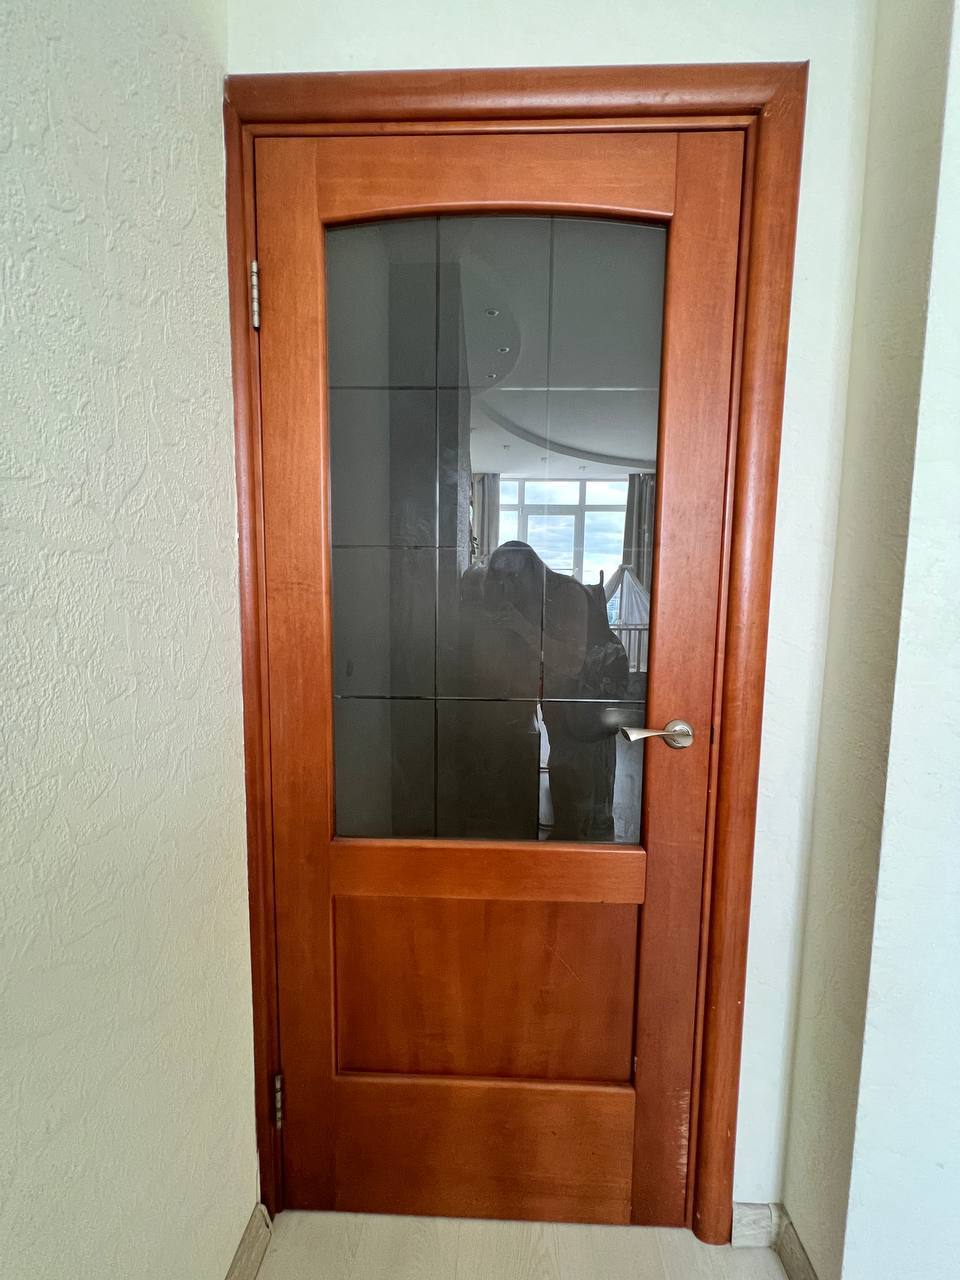 I'm looking for glass or a whole door - No rating, Door, Glass, Question, Ask Peekaboo, Longpost